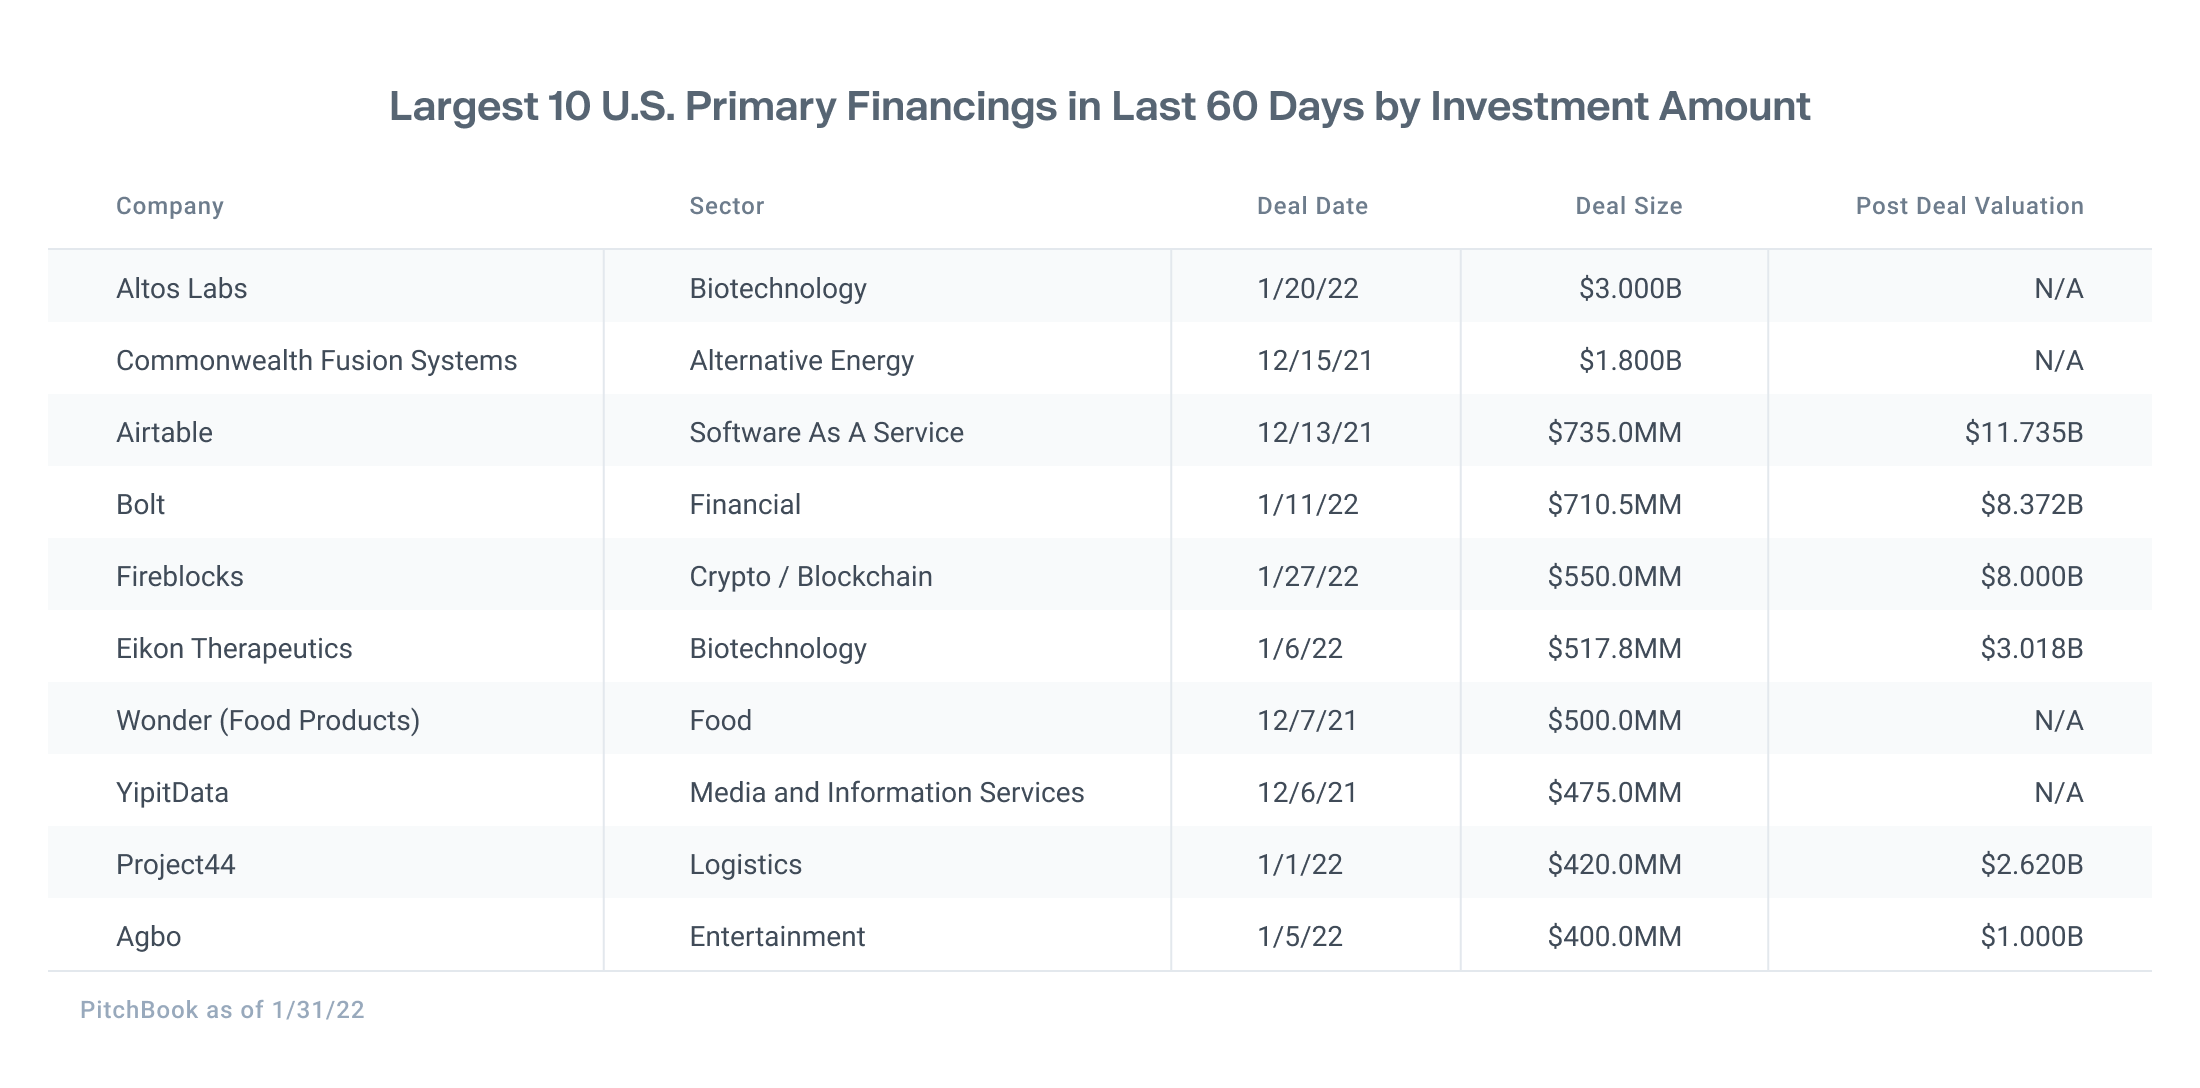 Forge data table showing largest 10 US private companies primary financings in the last 60 days and post deal valuation